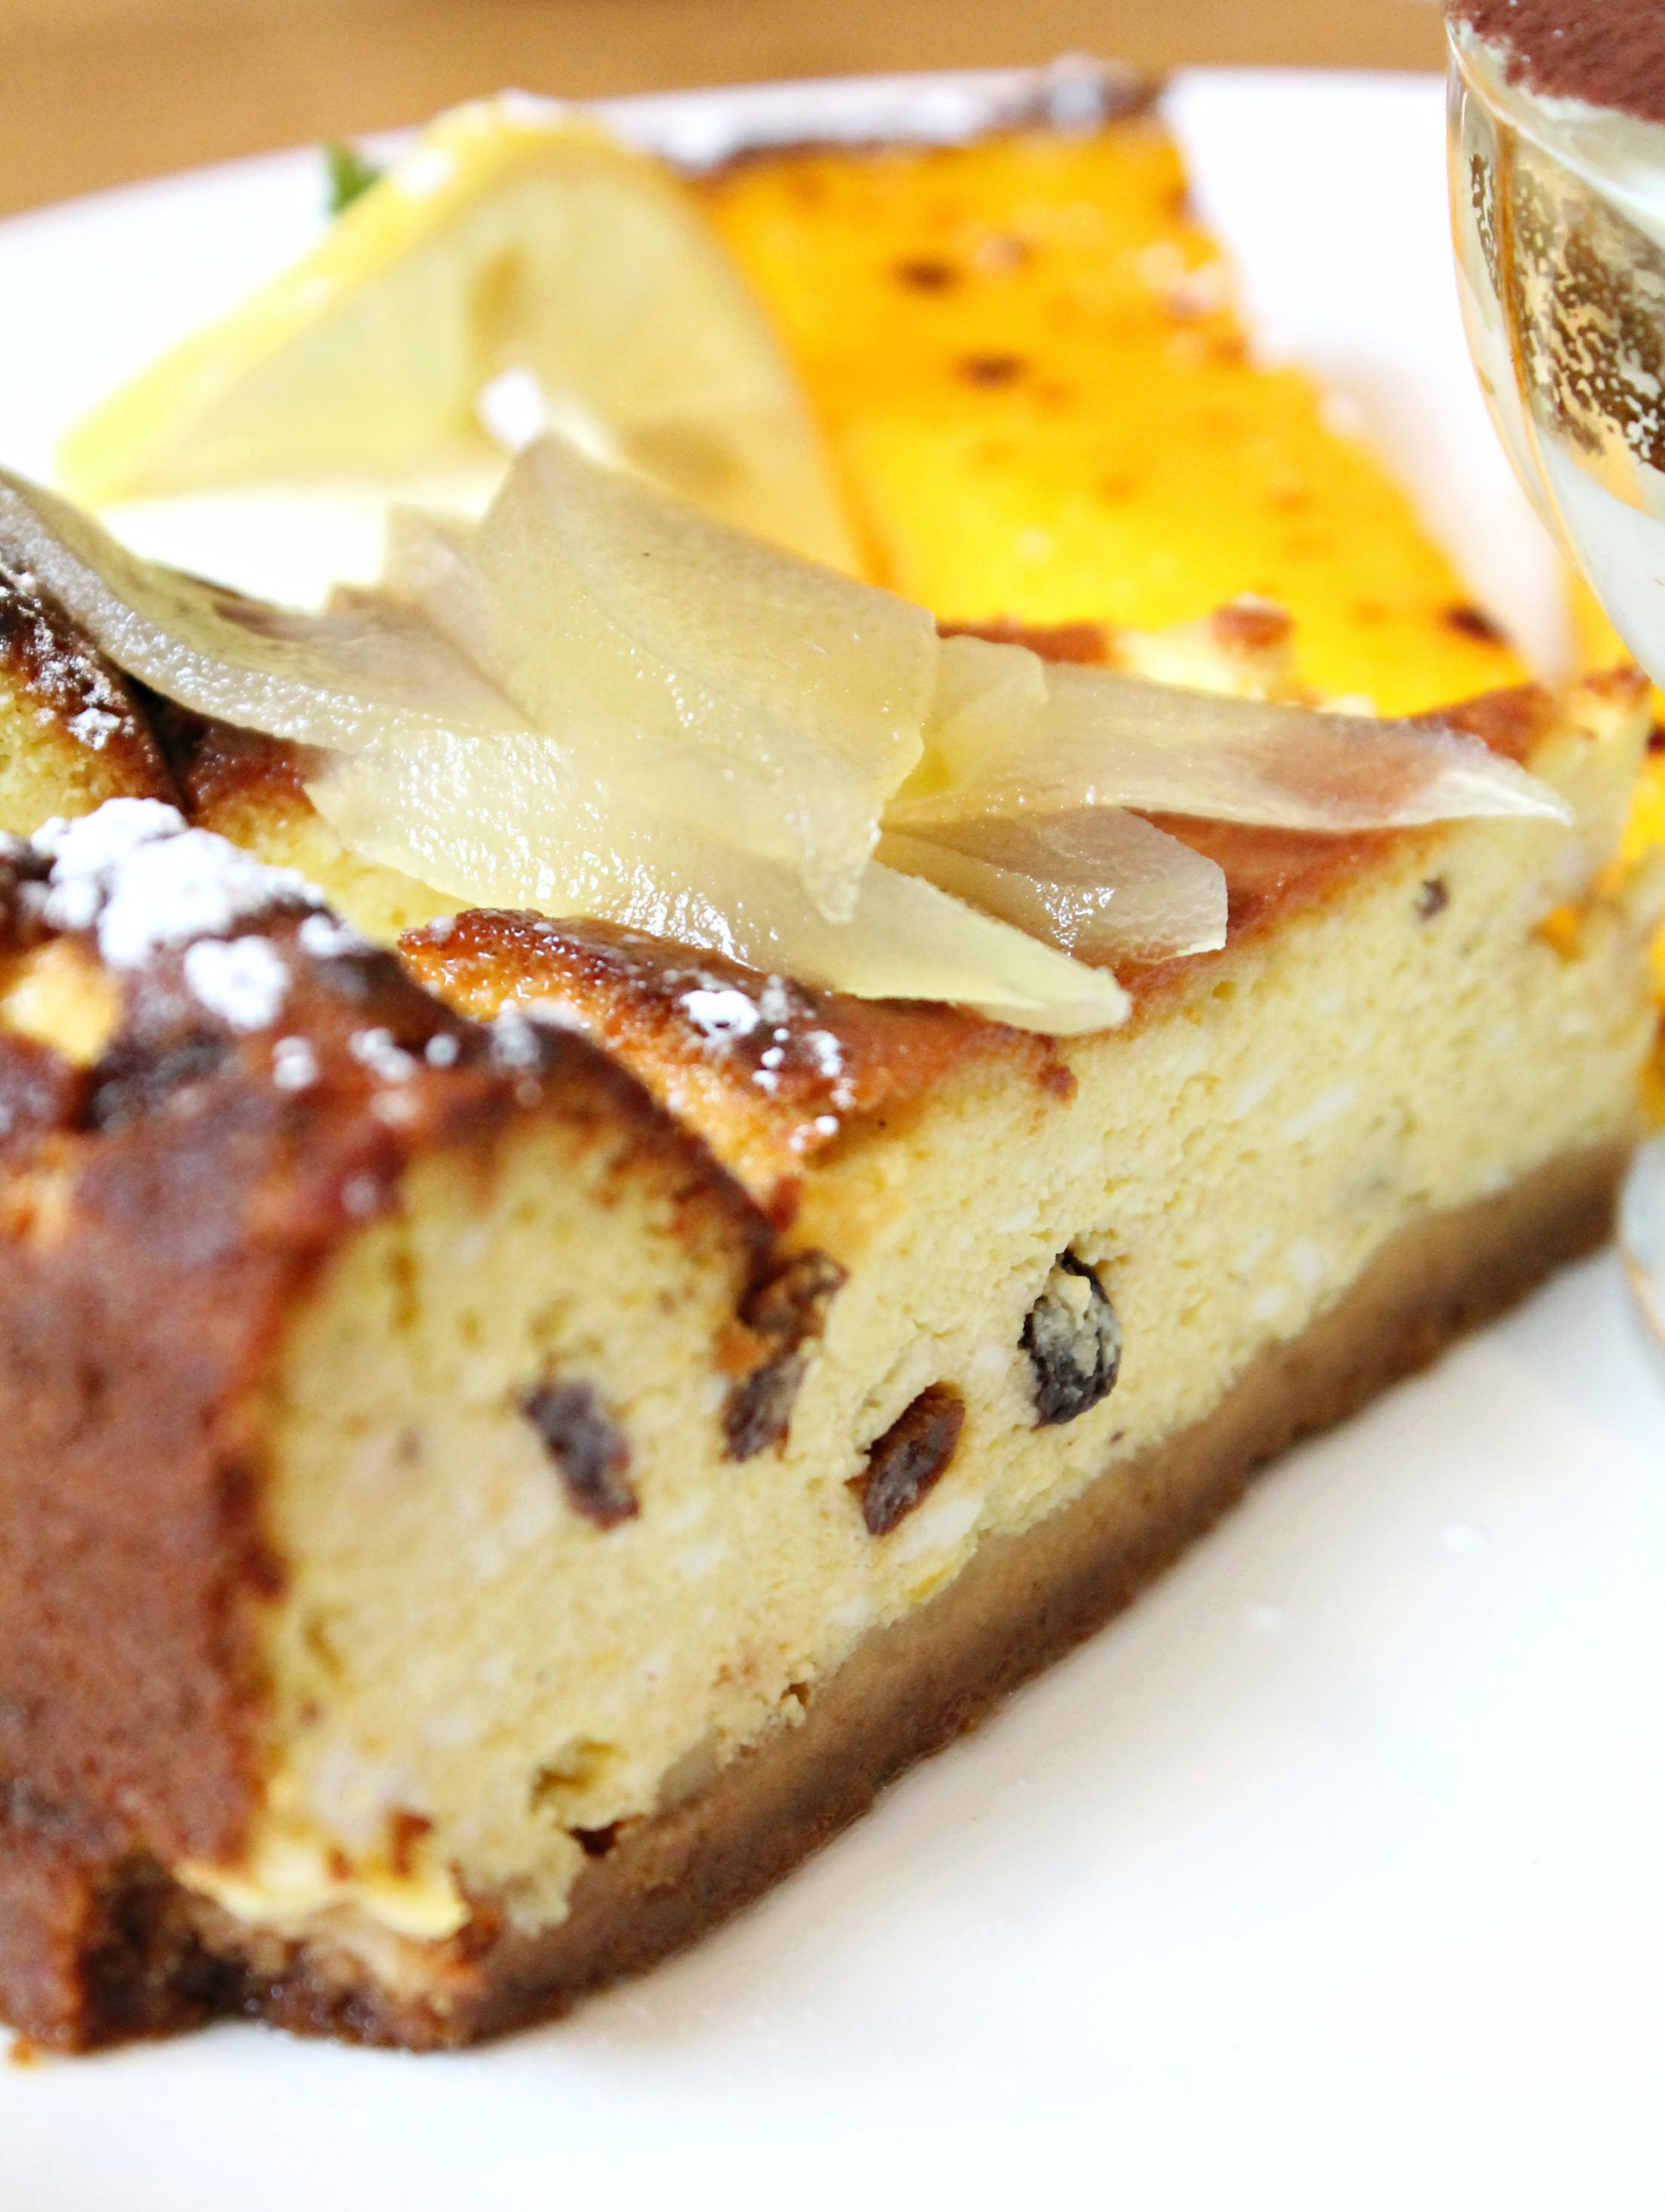 Ricotta-Cheesecake-at-Theo's-Simple-talian-photo-by-Geraldine-Tan-Little-Big-Bell copy